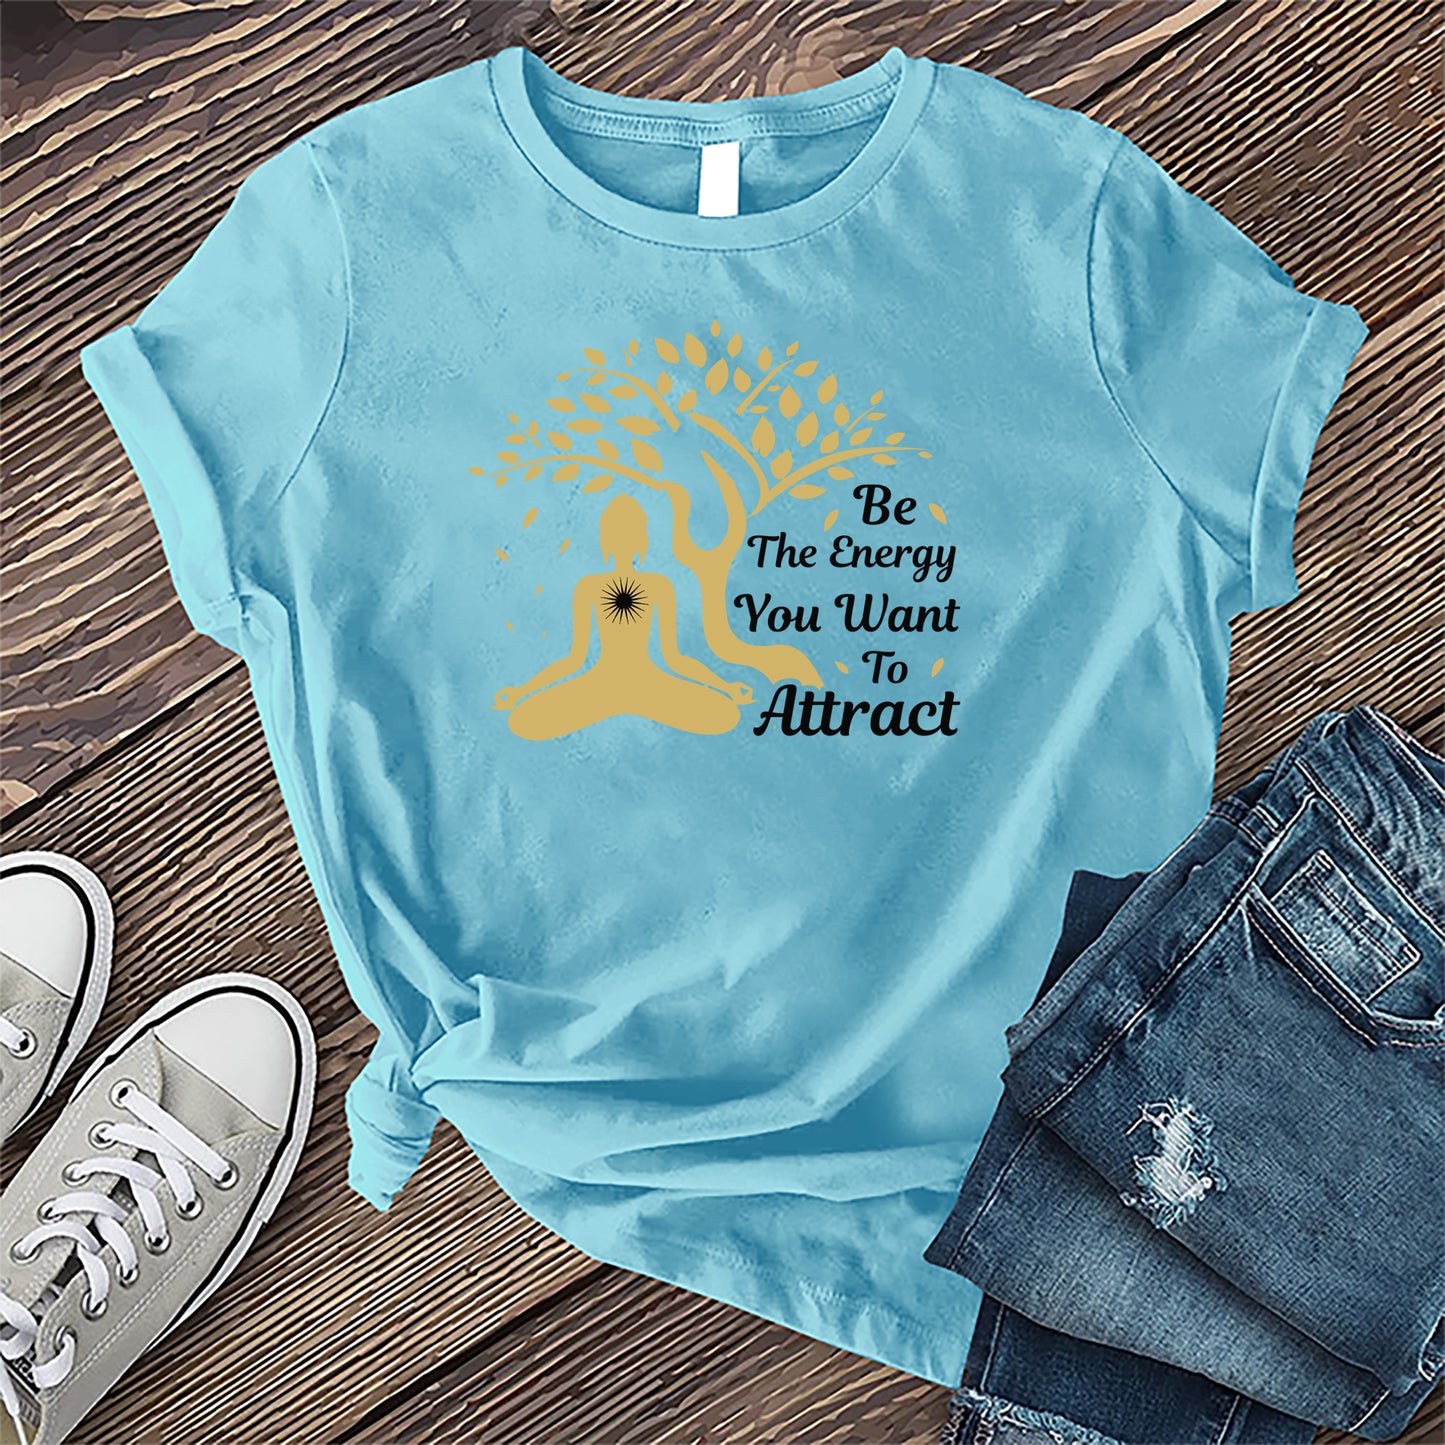 Be The Energy You Want to Attract T-shirt